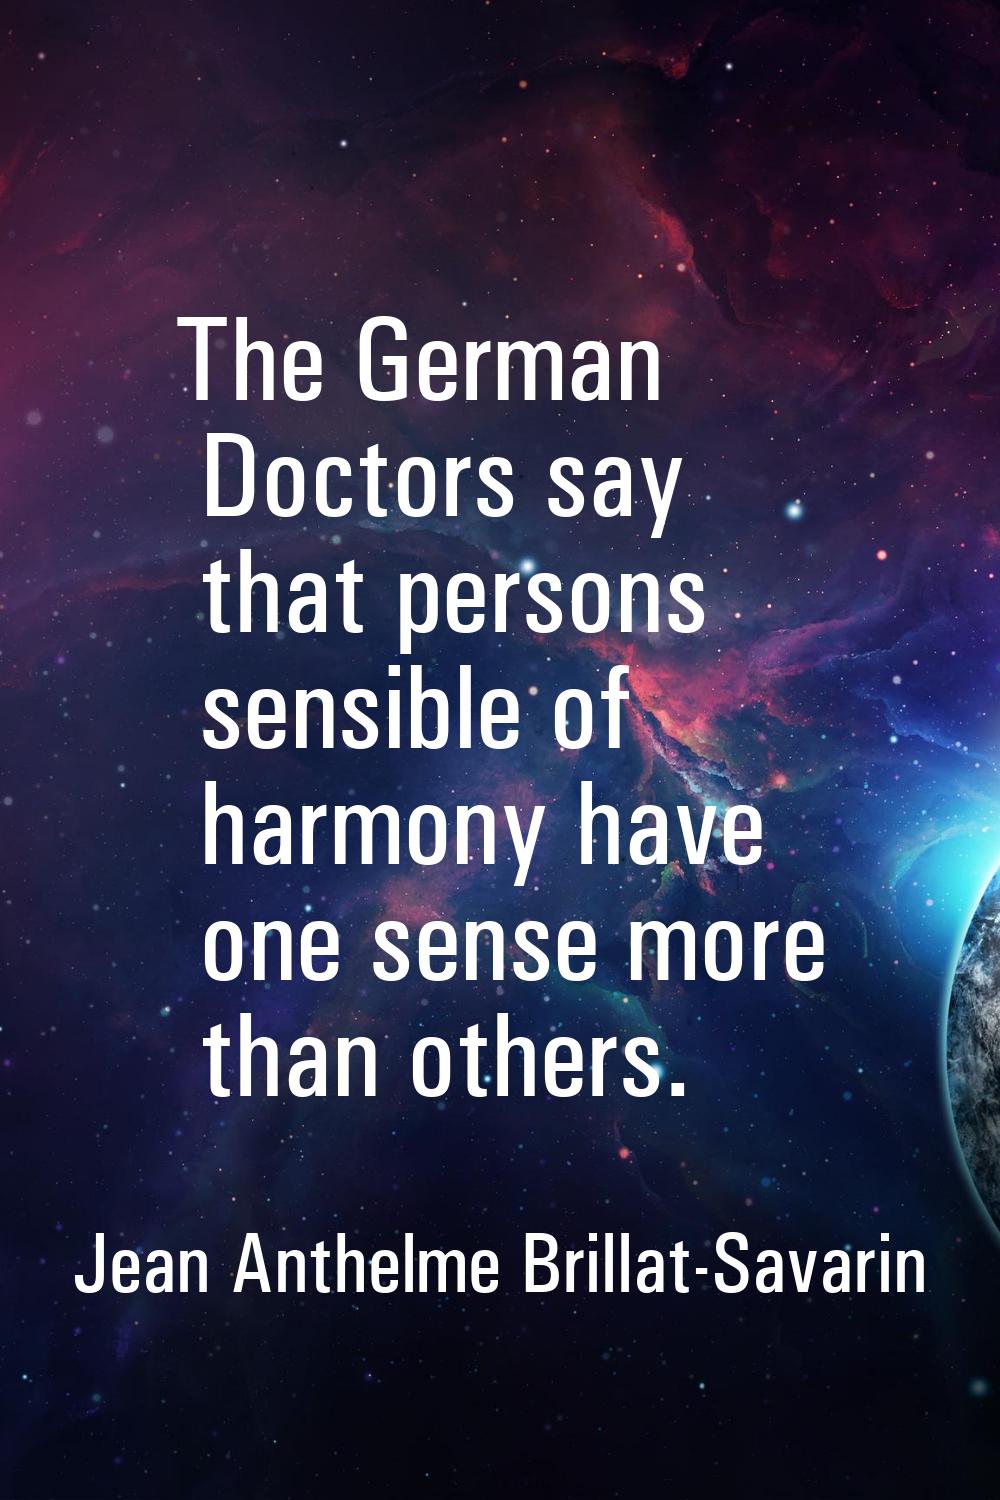 The German Doctors say that persons sensible of harmony have one sense more than others.